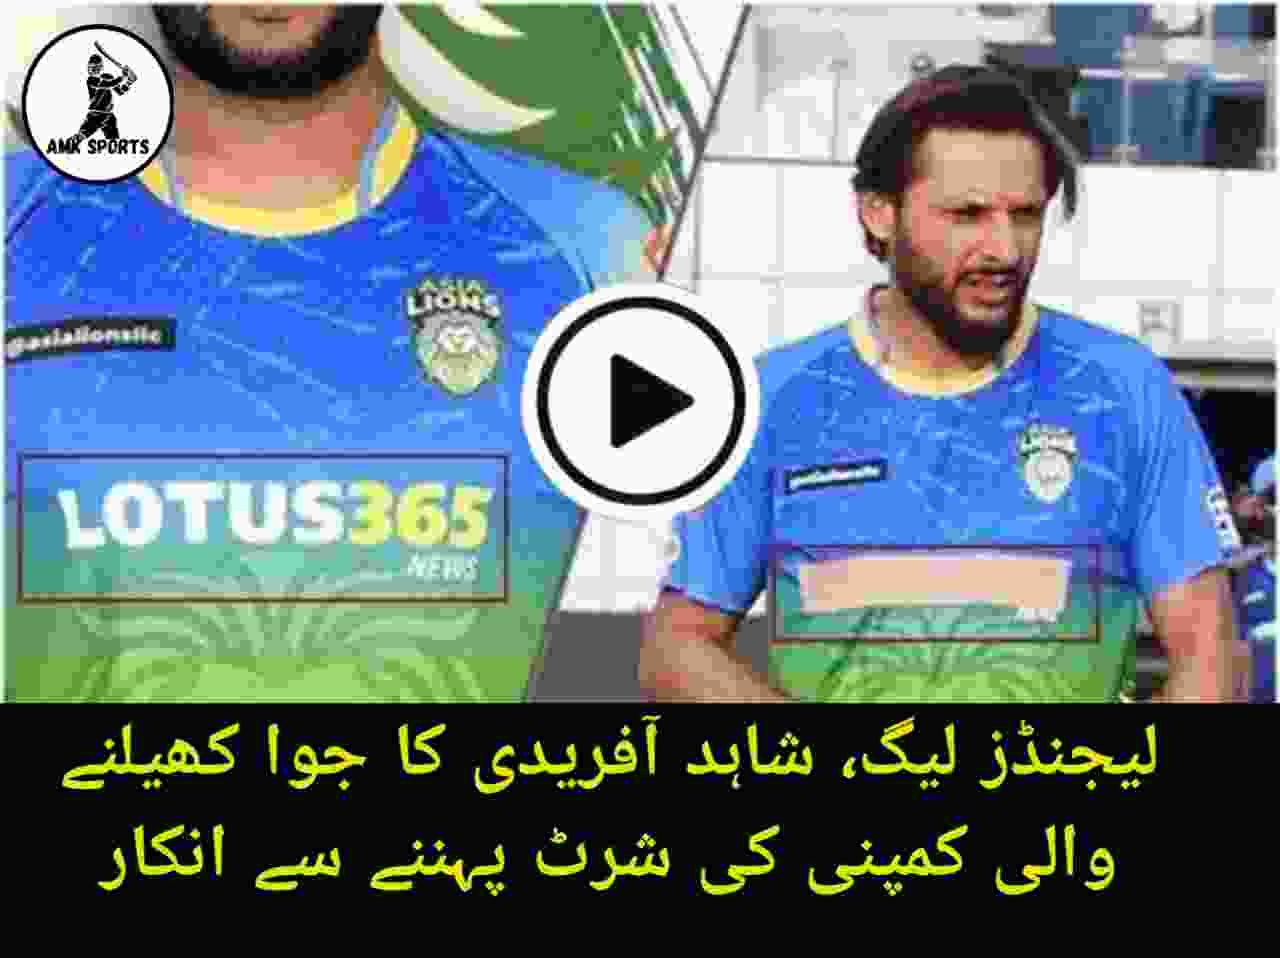 Shahid Afridi of League of Legends' refusal to wear a gambling company's shirt